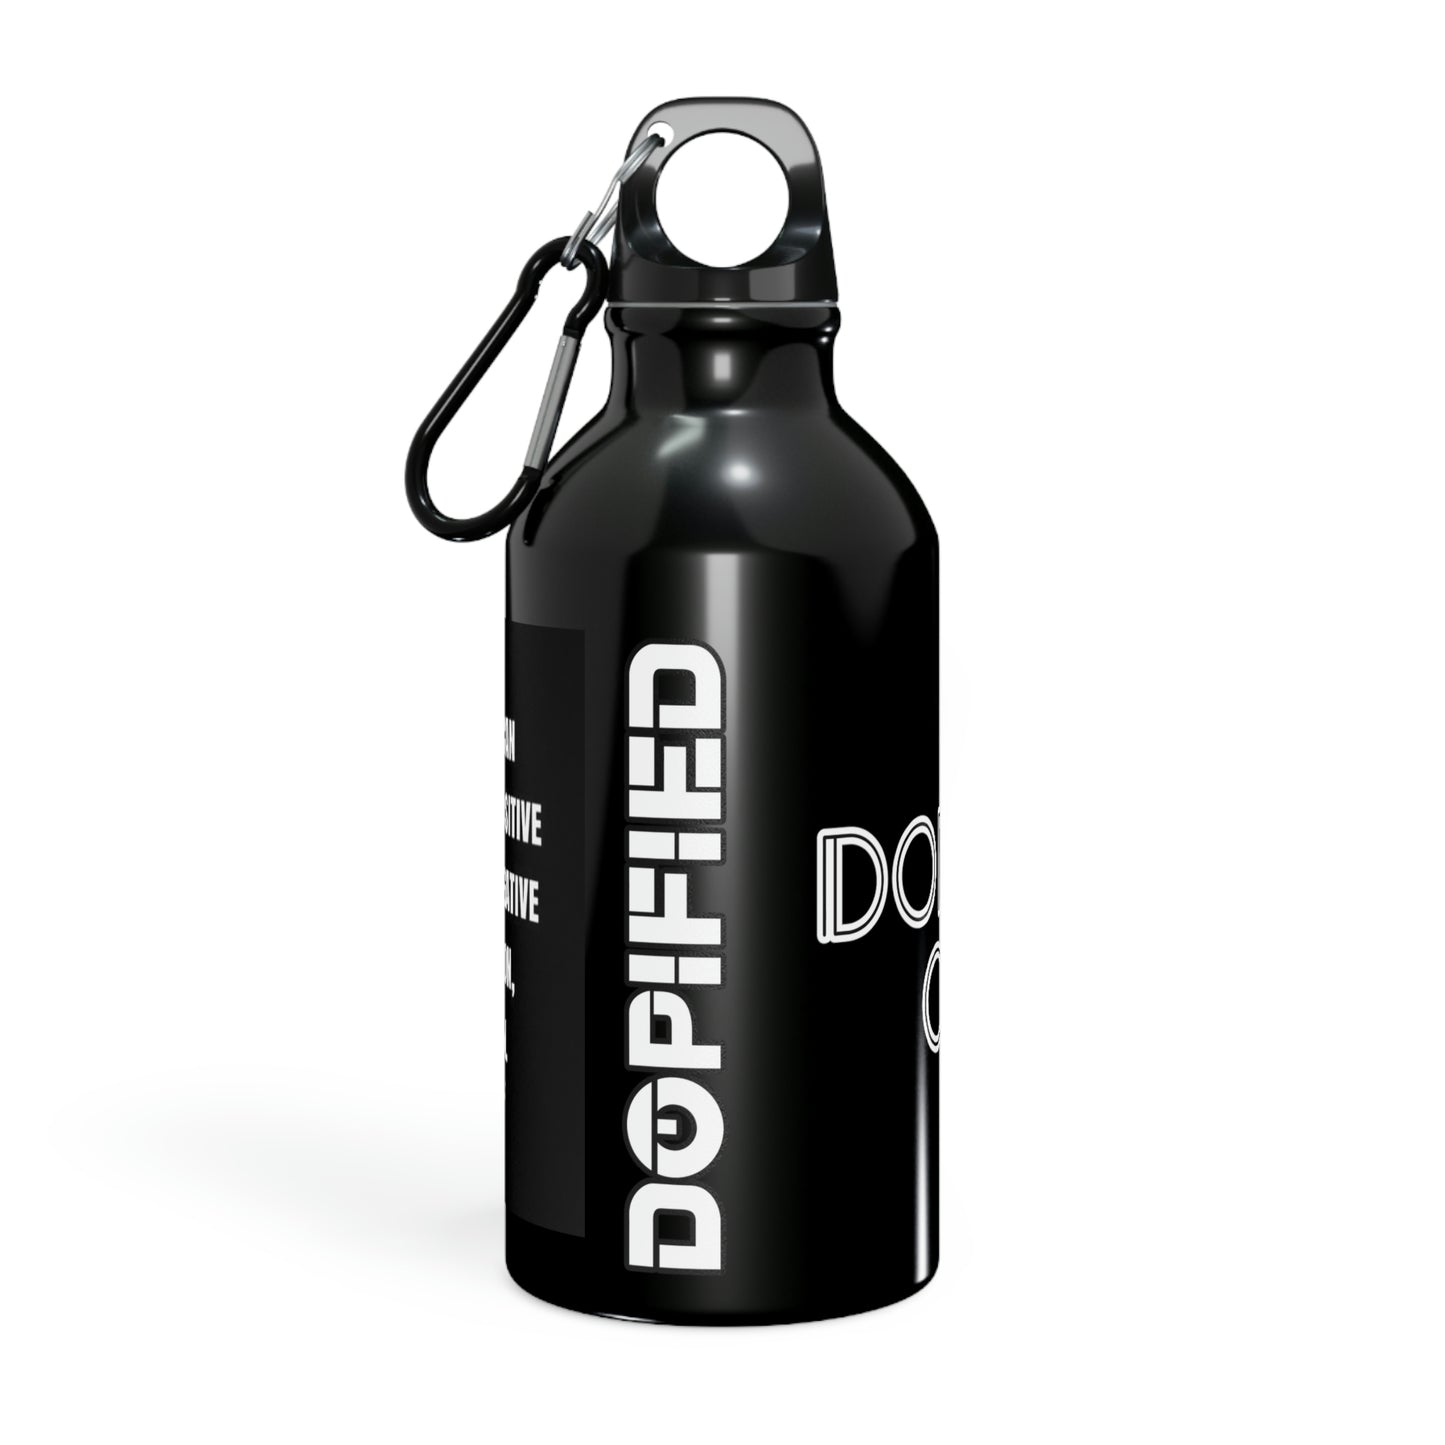 The DOPiFiED CEO Sport Bottle